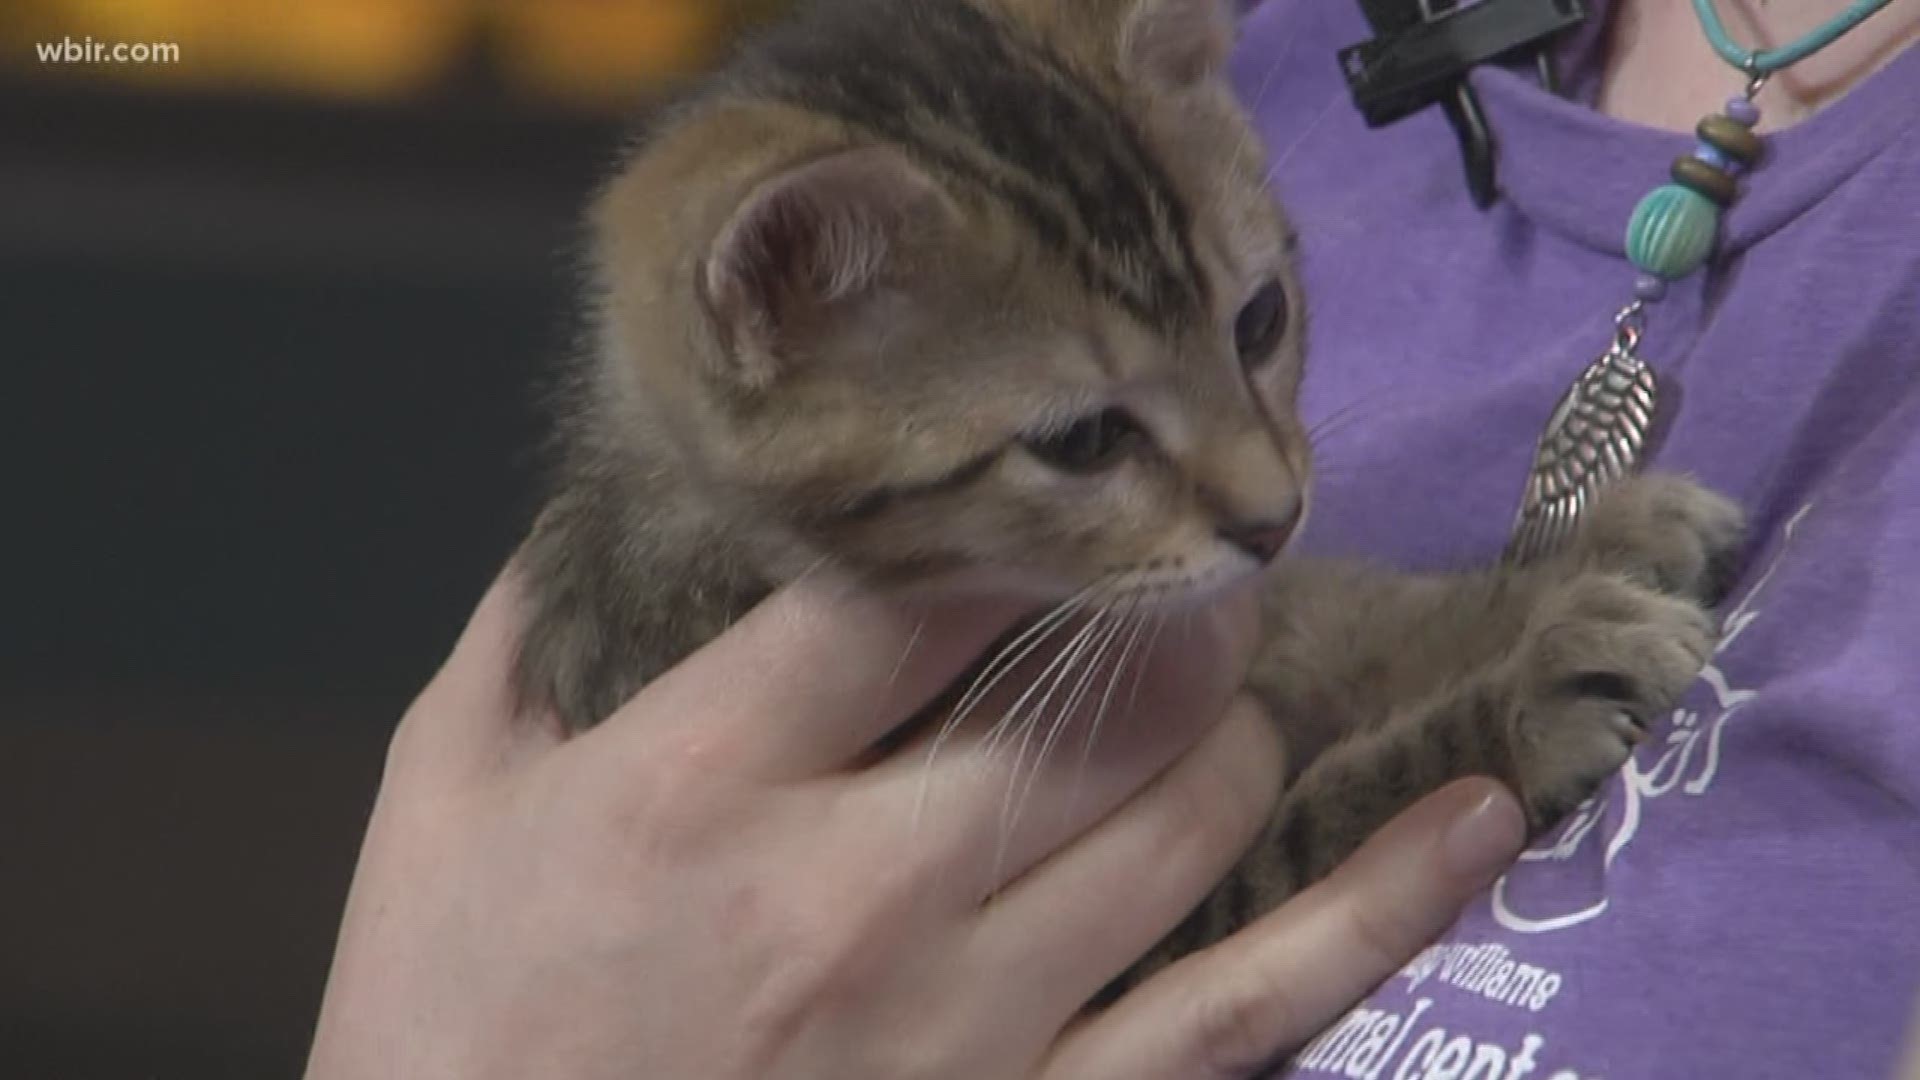 Young pWilliams Animal Center introduces us to an adoptable pet and talks about their working cat program.